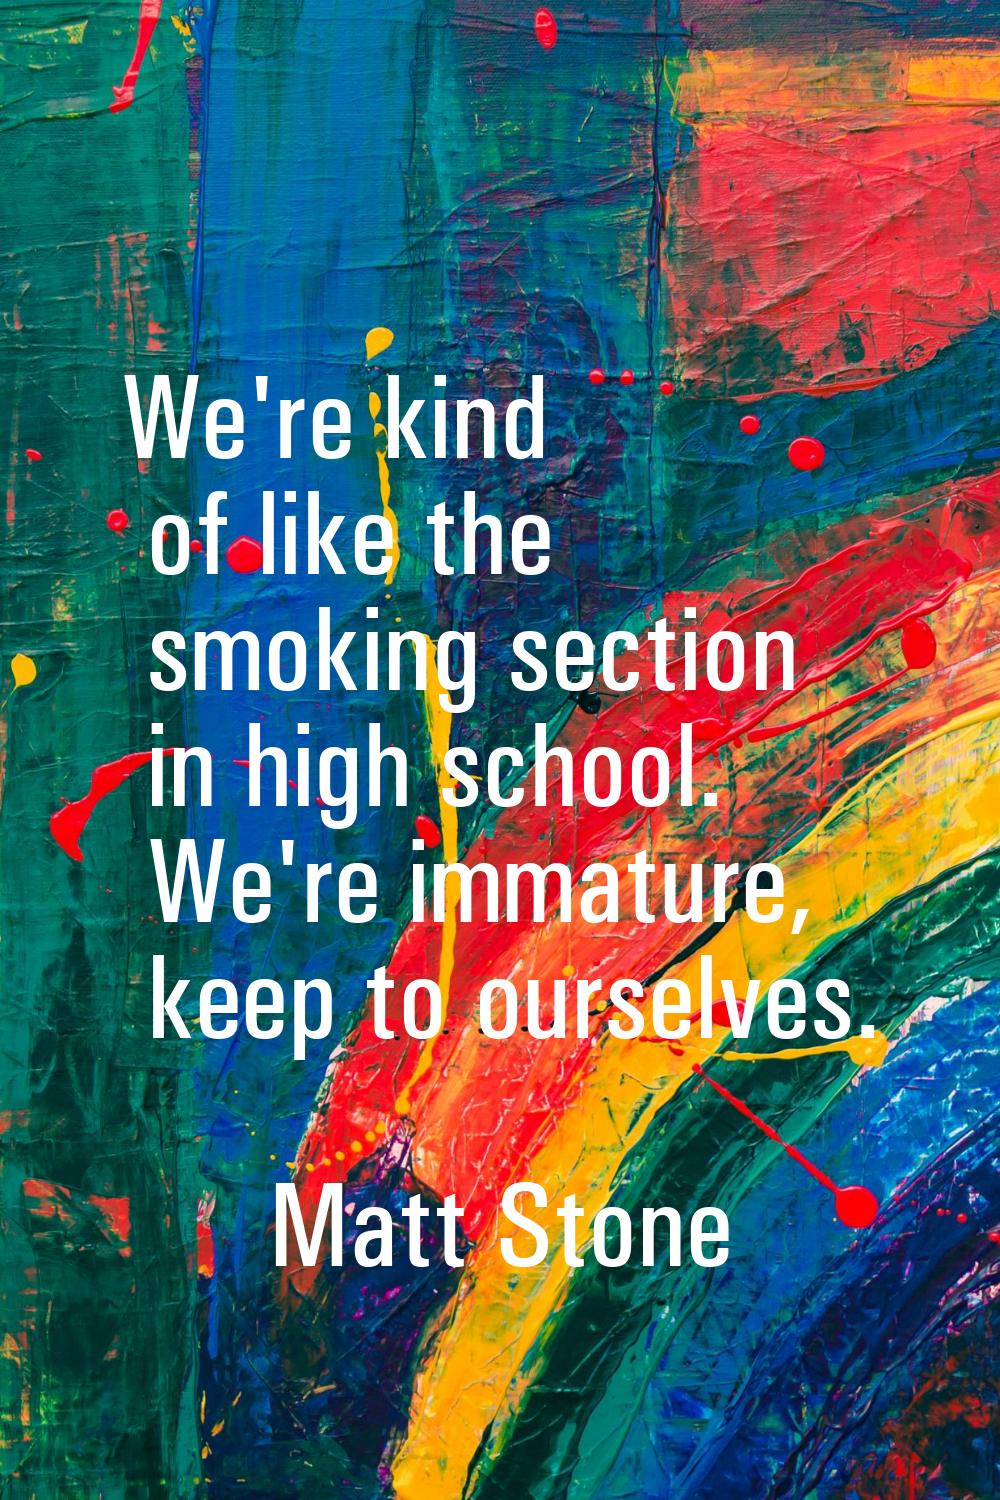 We're kind of like the smoking section in high school. We're immature, keep to ourselves.